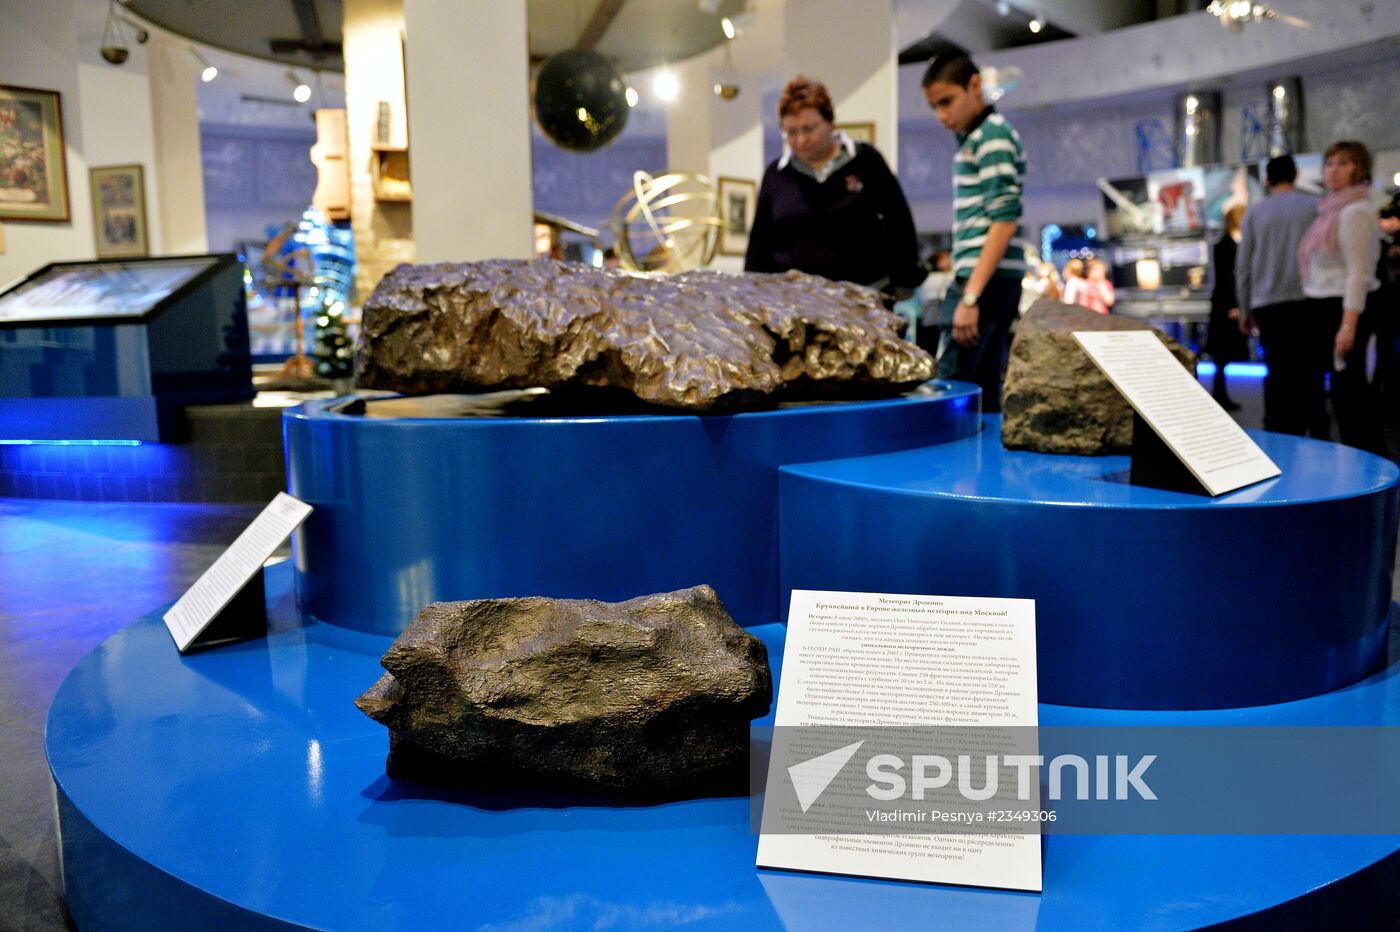 New exhibits in the Moscow Planetarium's meteorite collection